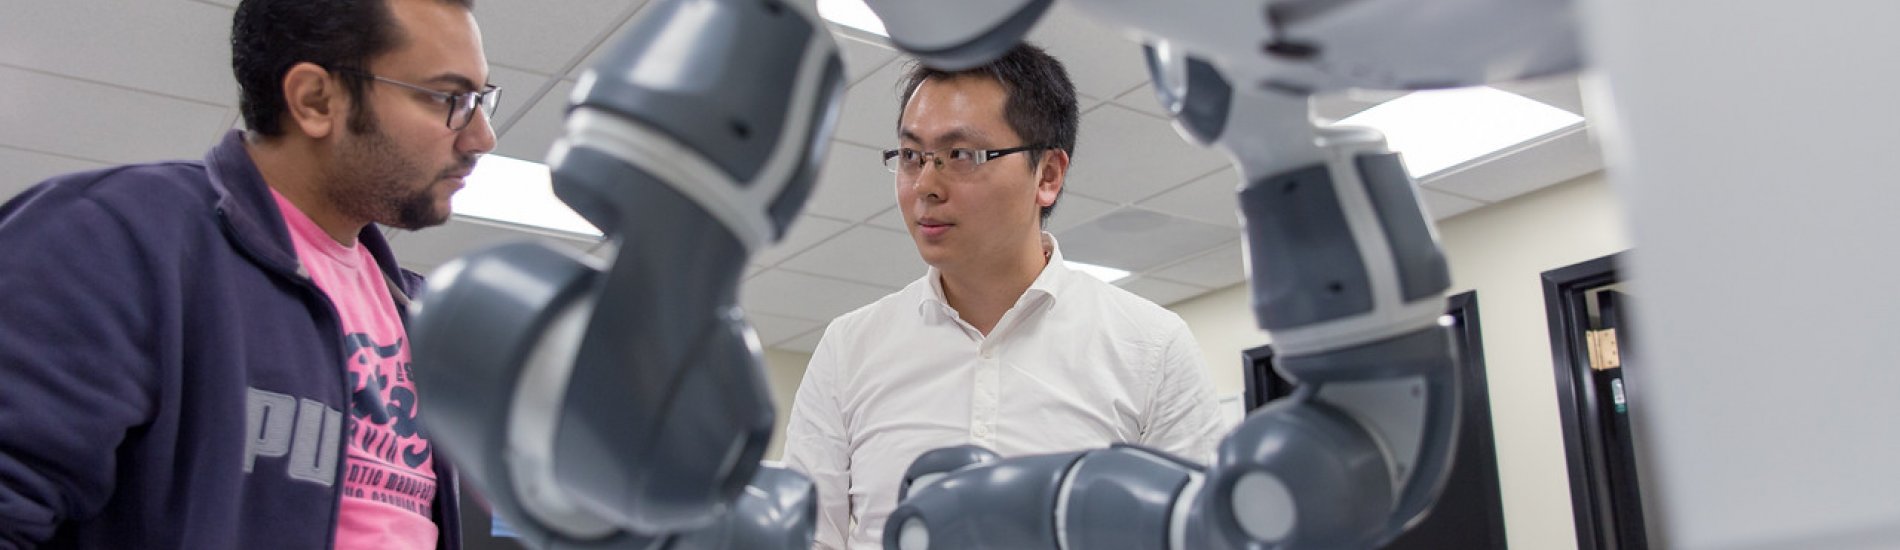 UAlbany researchers work on robotic arms.